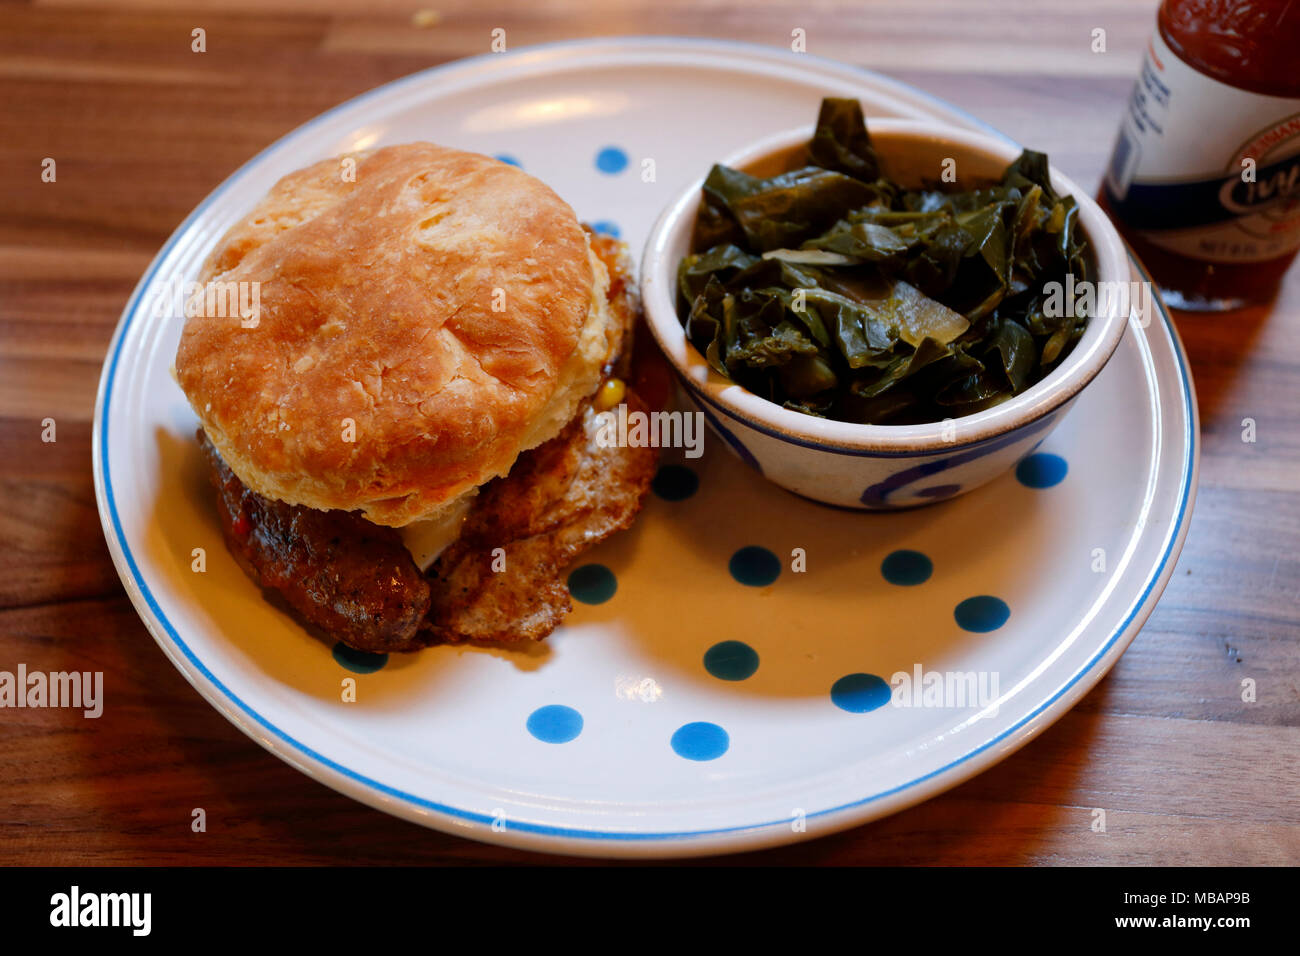 Peach jam, fried Egg and sausage biscuit with a side of collard greens at Seattle Biscuit Company, Seattle, Washington. Stock Photo